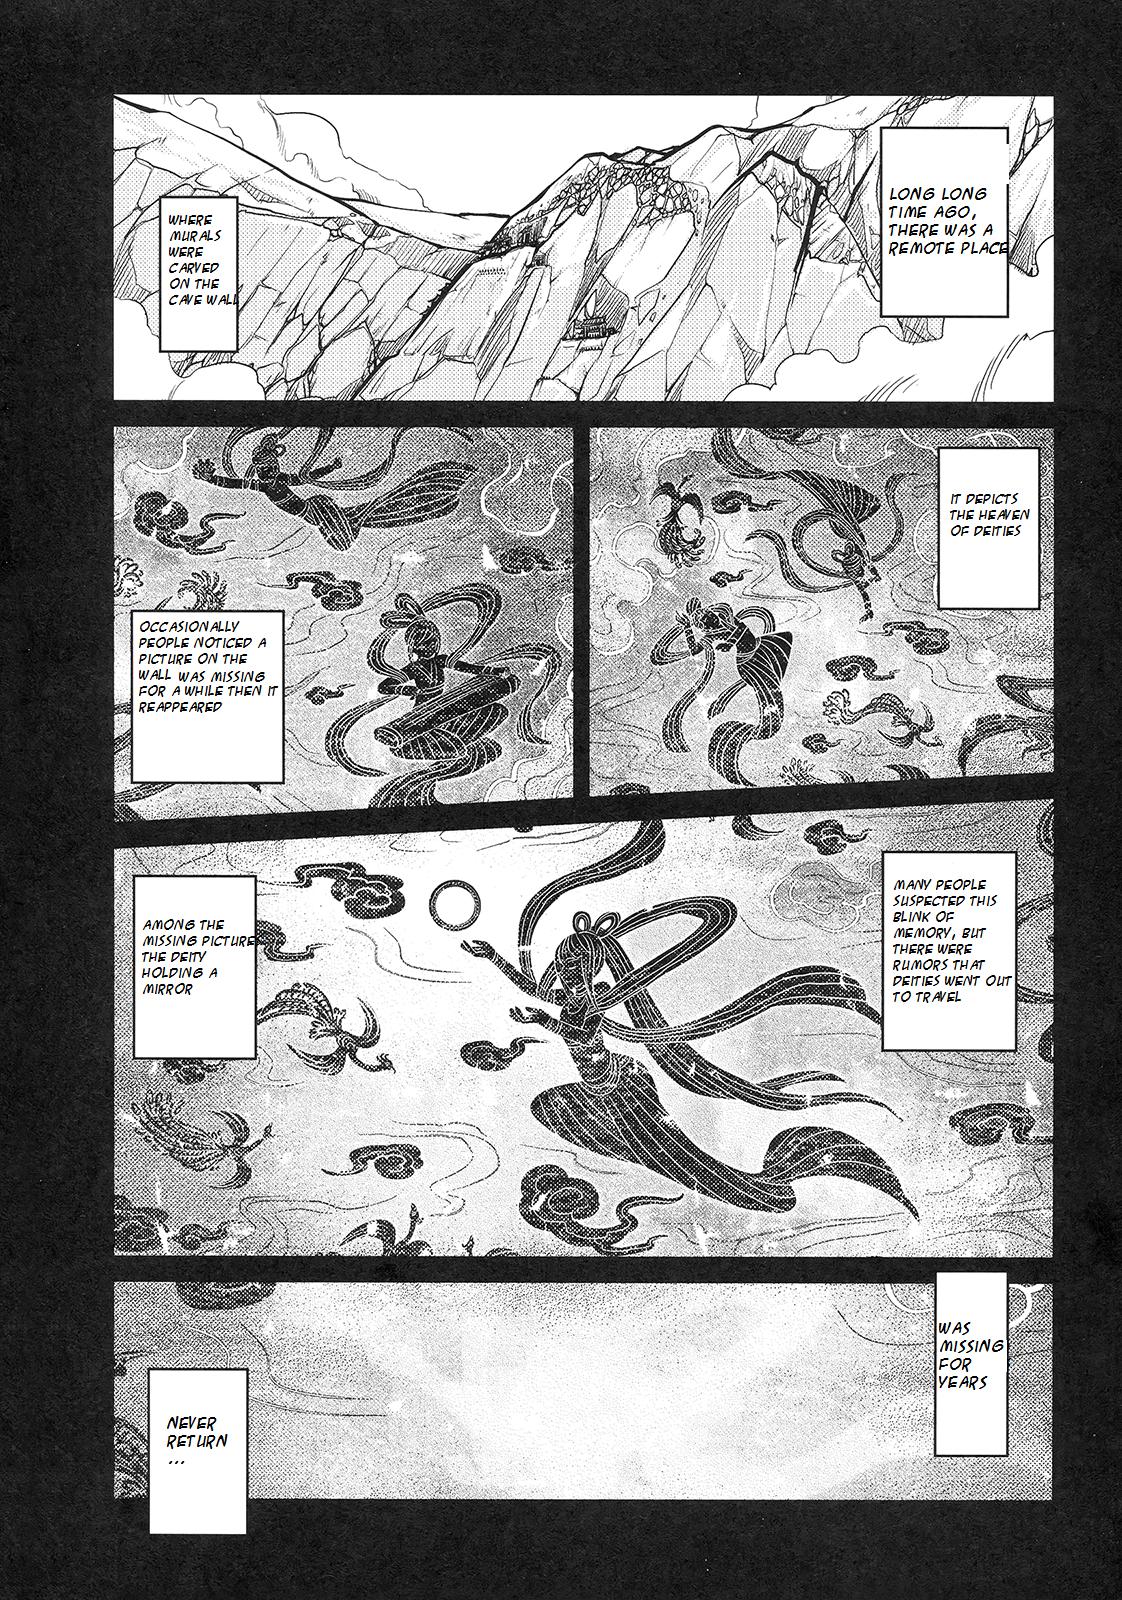 Scissoring Tale of the Mirror Squirting - Page 4